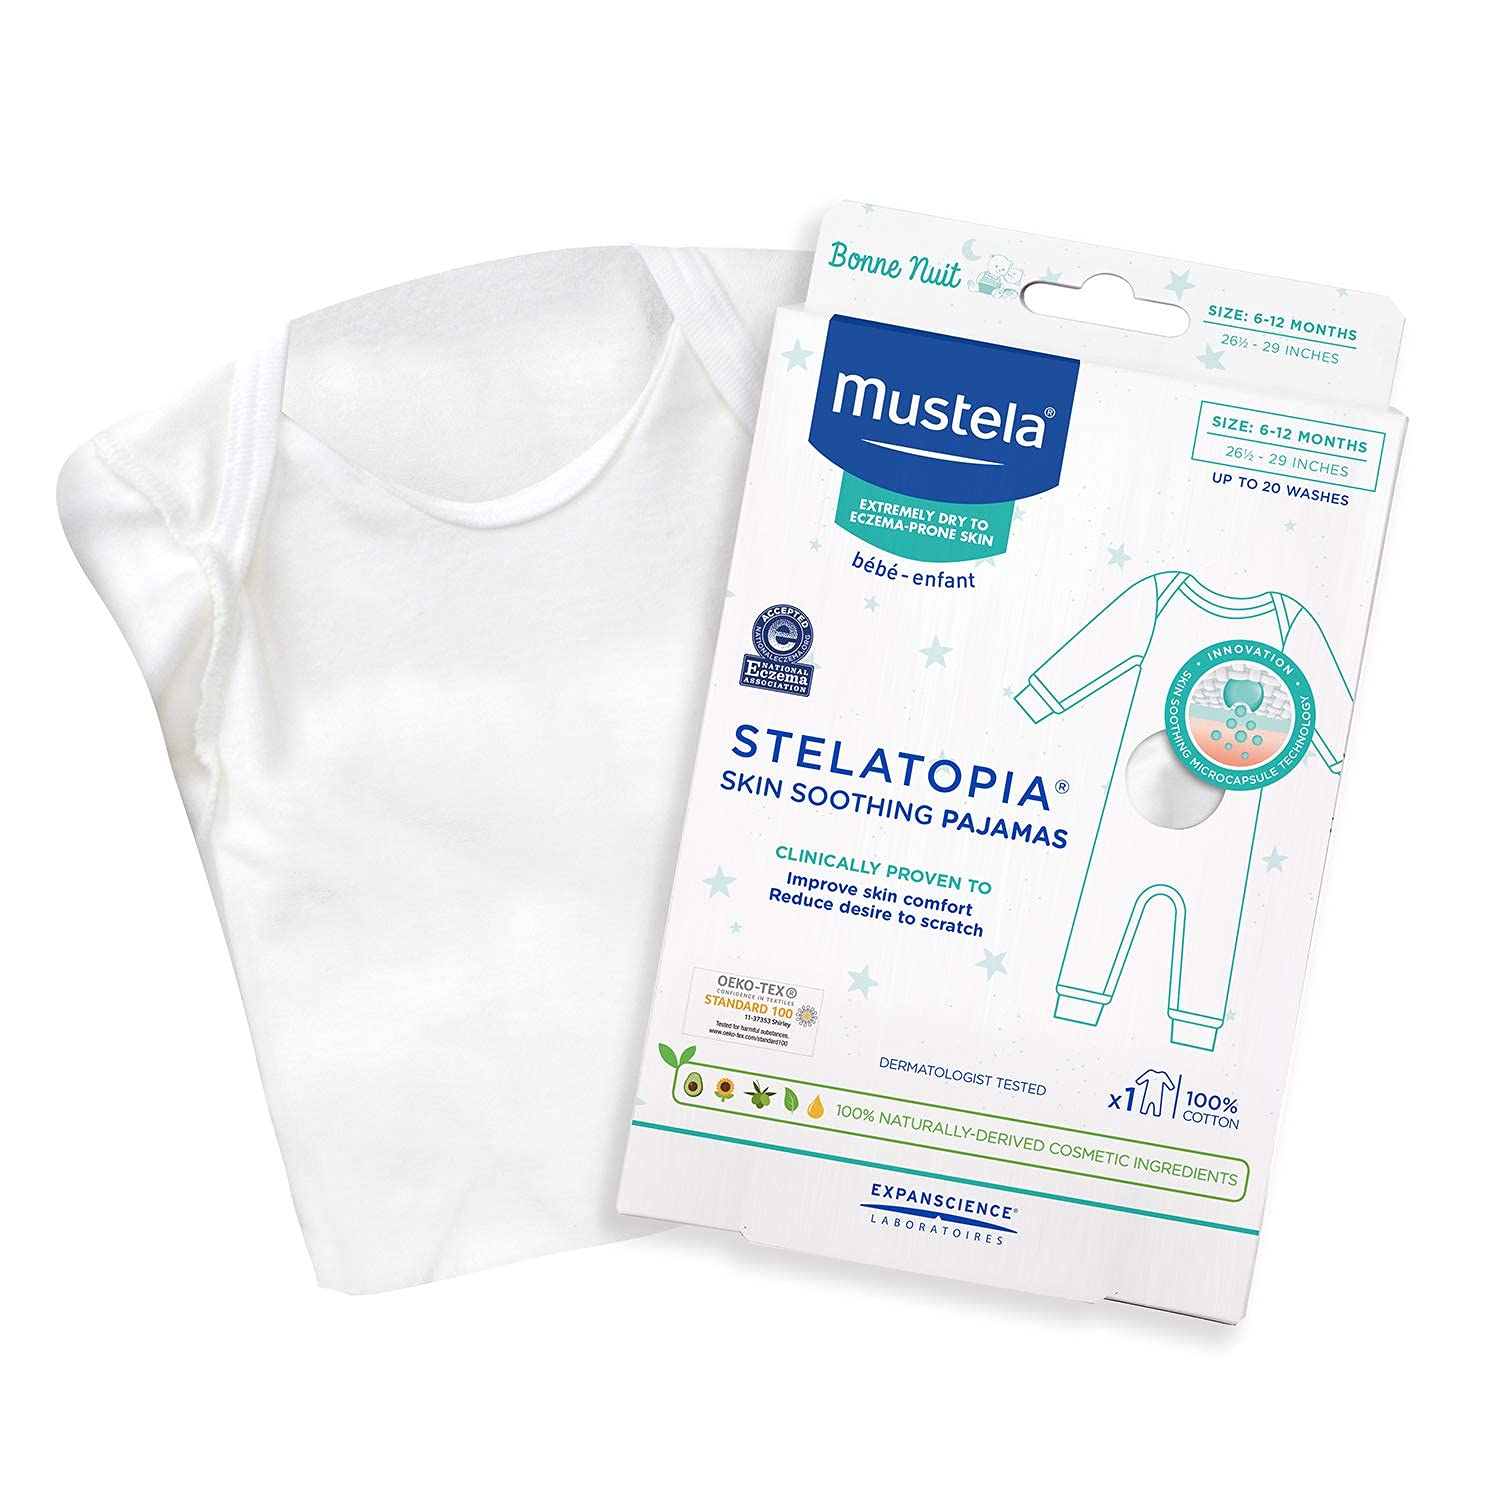 Mustela Stelatopia Skin Soothing Pajamas - Baby Pajamas for Eczema-Prone Skin - with Natural Avocado & Sunflower Oil - 6 to 12 Months . 1 Count (Pack of 1)